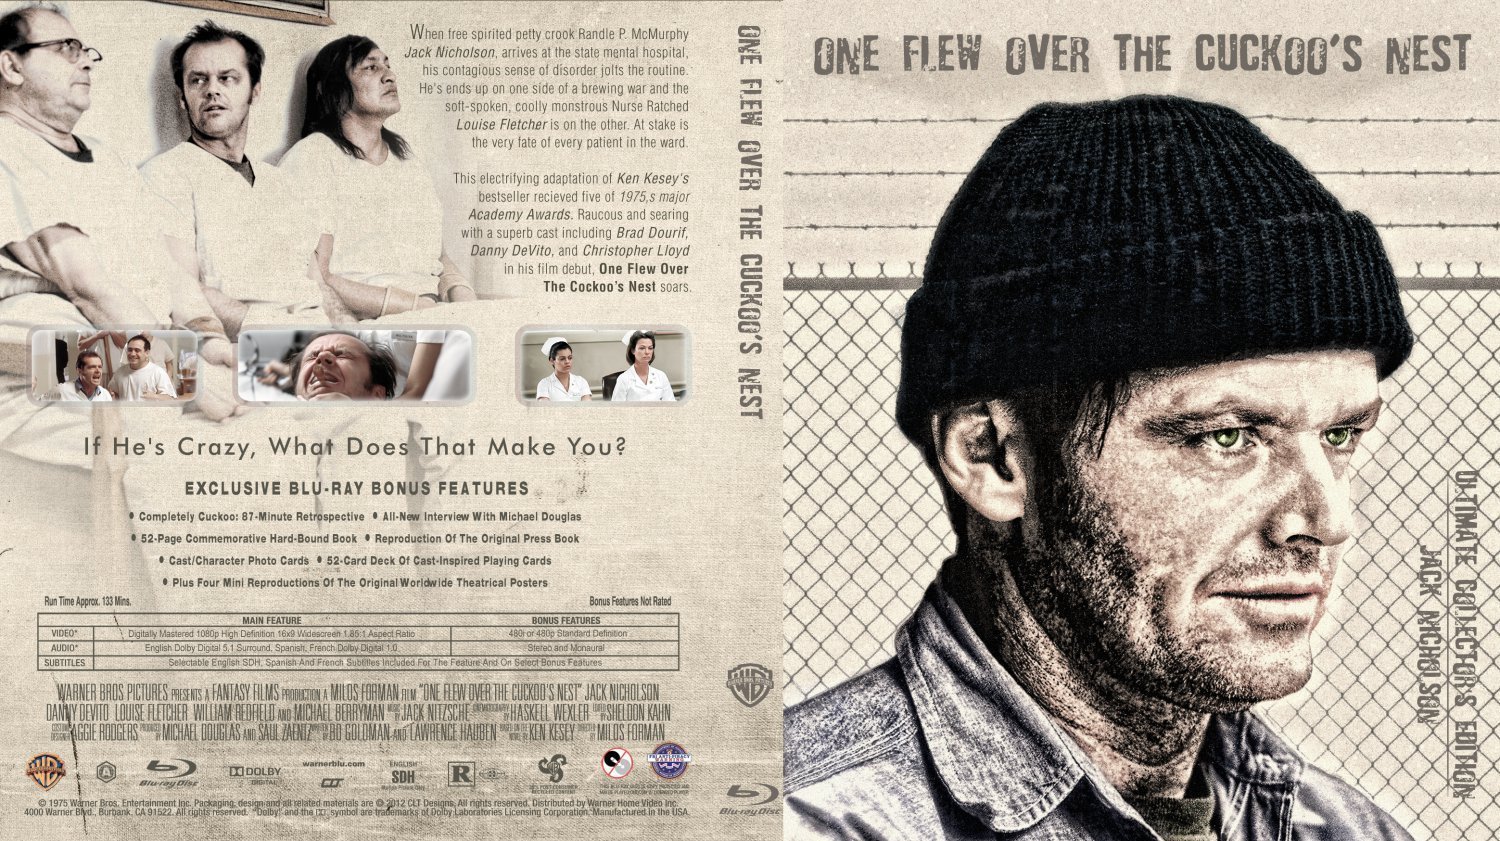 One Flew Over the Cuckoos Nest: Ken Kesey - amazoncom